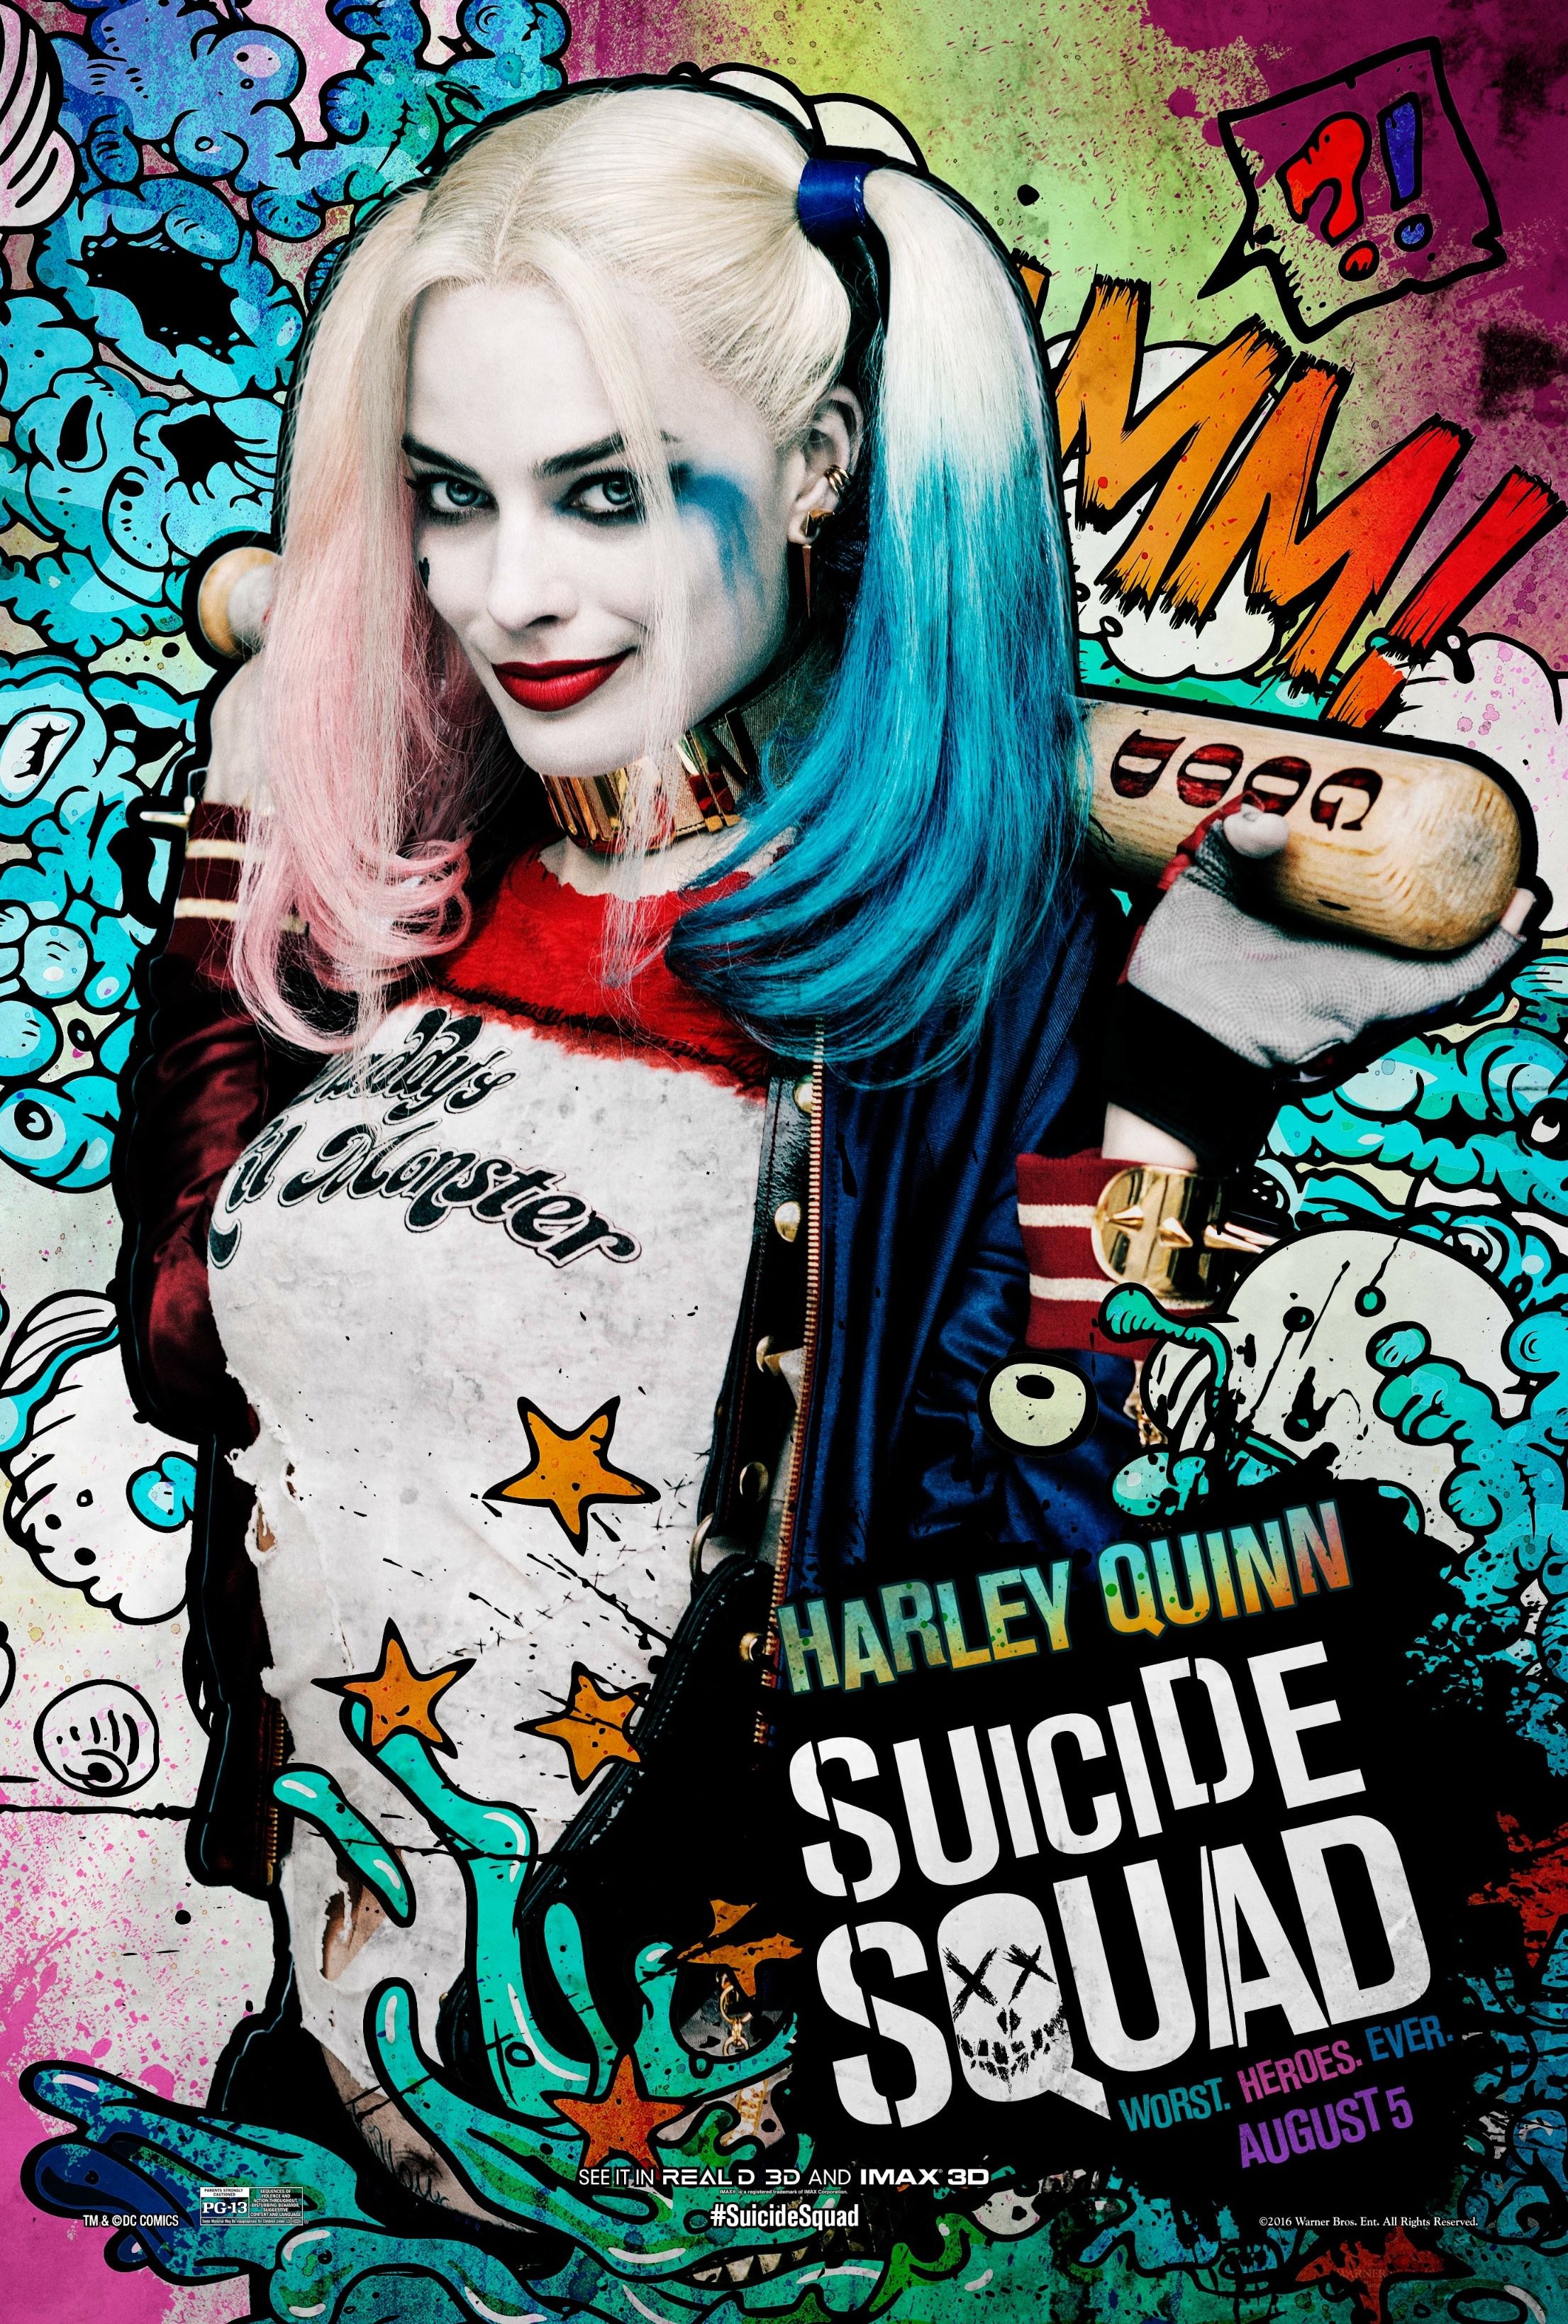 People 2211x3276 Suicide Squad Margot Robbie Harley Quinn colorful looking at viewer women movie poster pop art movies red lipstick actress baseball bat multi-colored hair